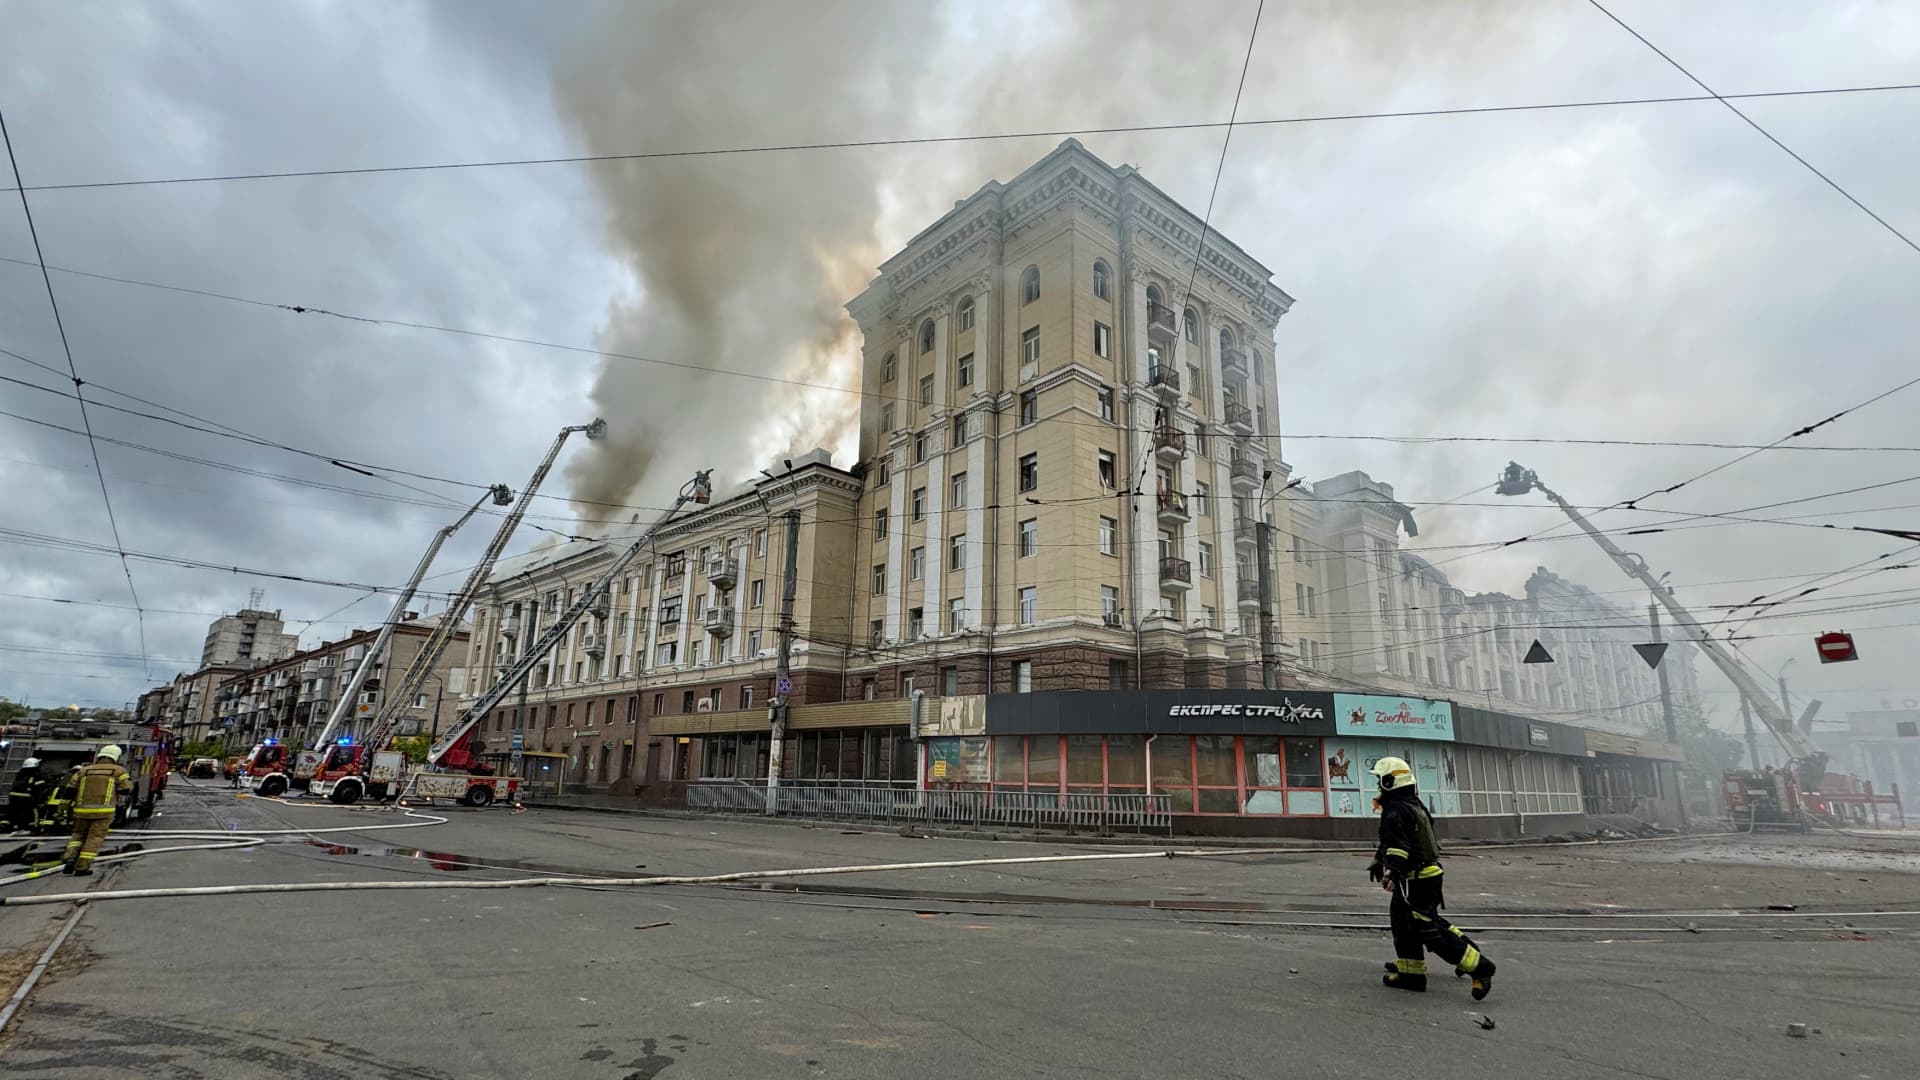 Ukrainian rescuers try to extinguish a fire in a residential building following a missile attack in Dnipro on April 19, 2024, amid the Russian invasion of Ukraine. Russian strikes overnight killed eight people, including two children, and injured 18 in Ukraine's central Dnipropetrovsk region, the interior ministry said on April 19, 2024, updating the toll.